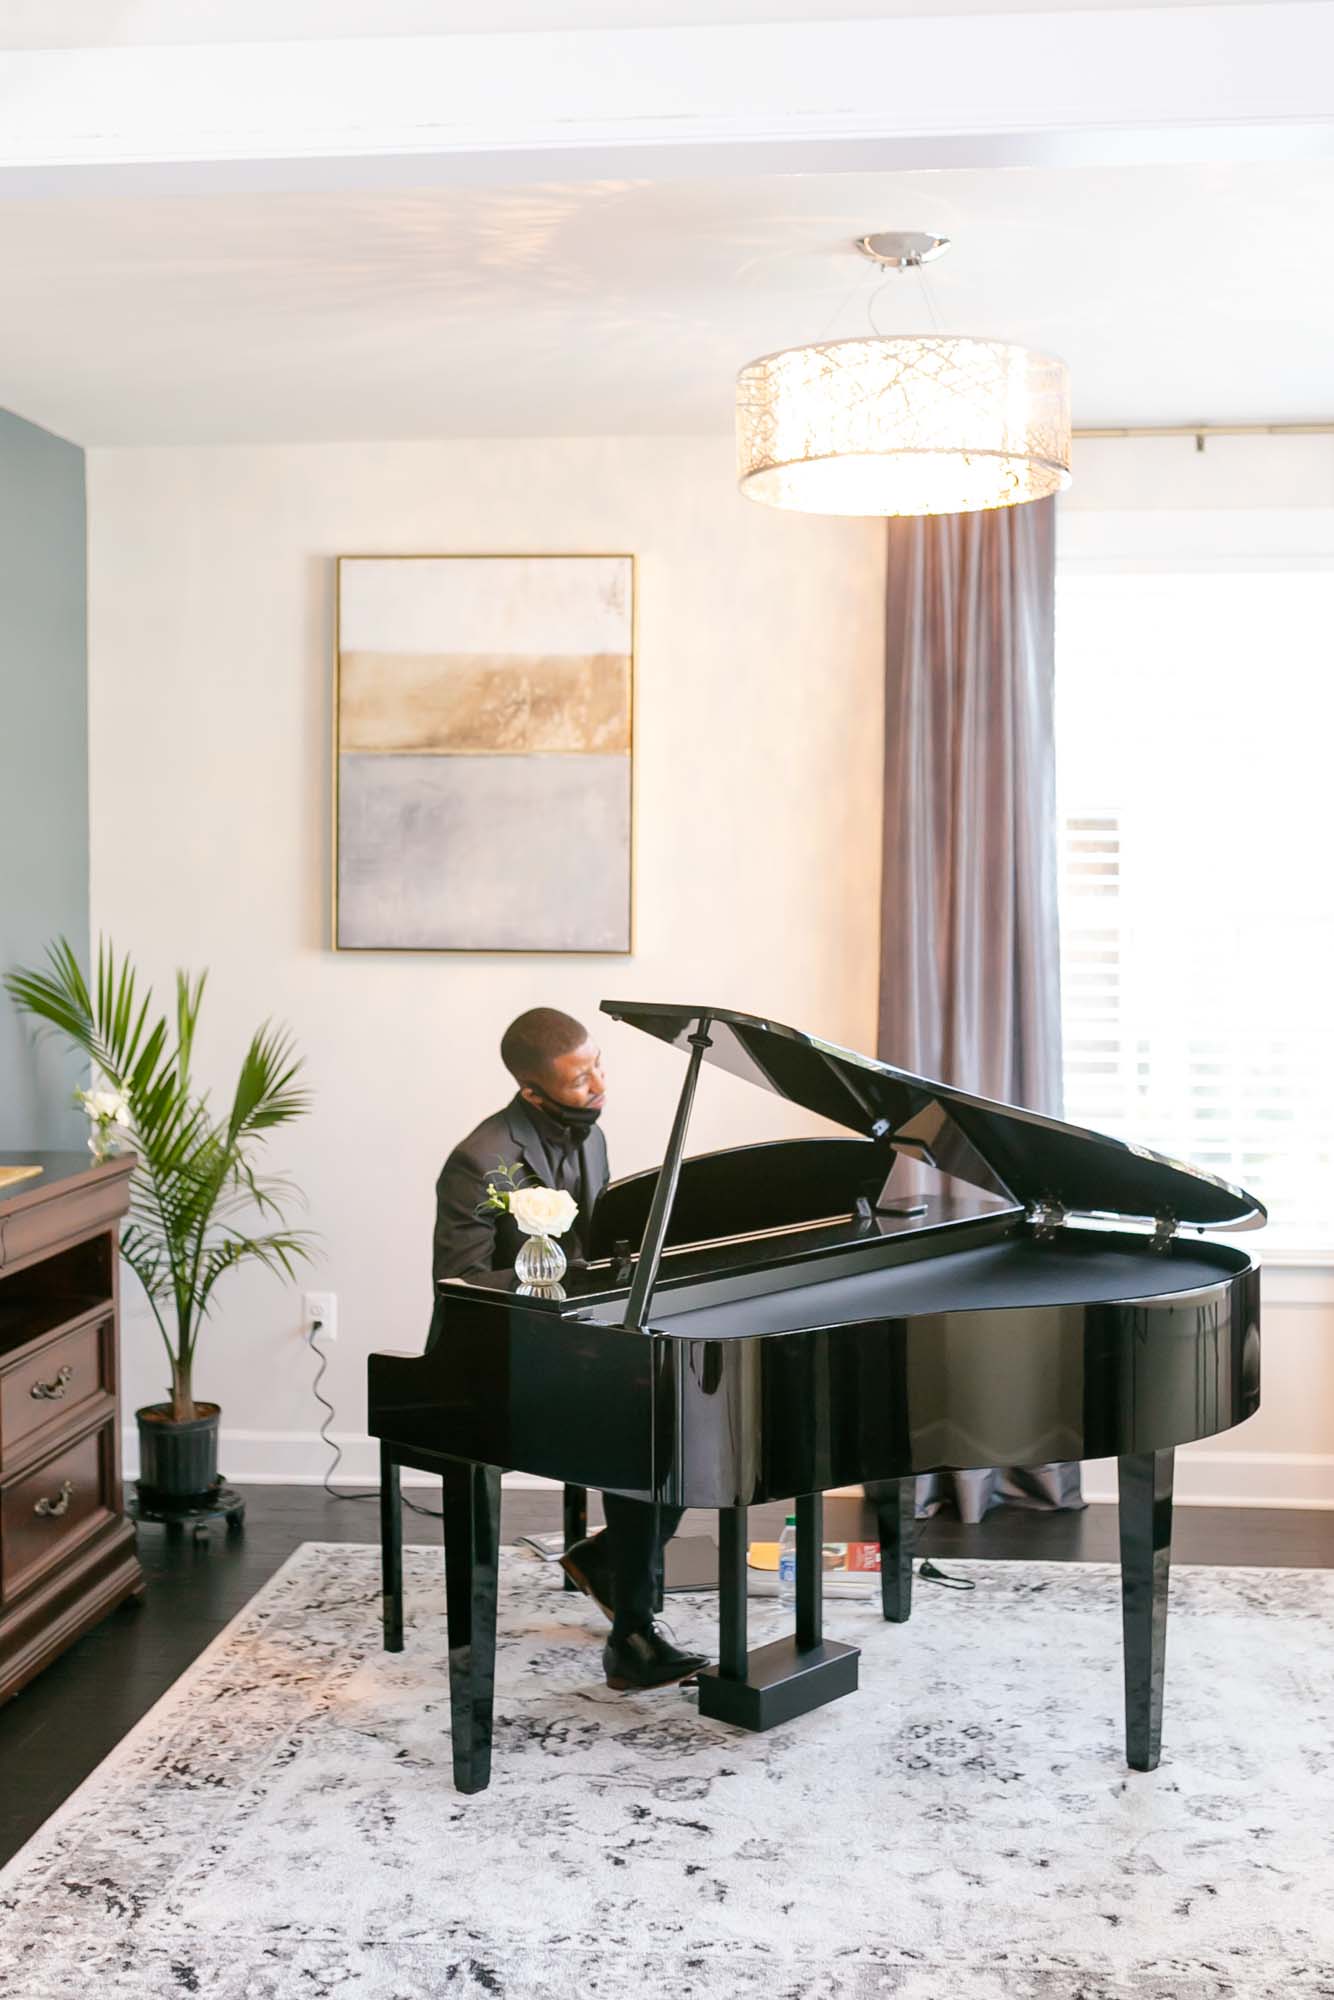 This couple transformed their home into a fabulous wedding venue | Sarandipity Photography | Featured on Equally Wed, the leading LGBTQ+ wedding magazine - pianist